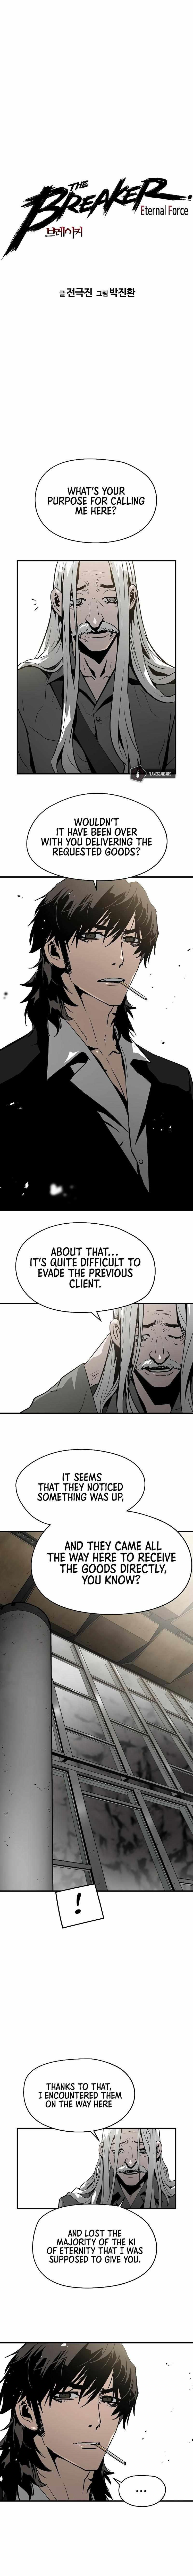 The Breaker: Eternal Force Chapter 54 page 4 - 